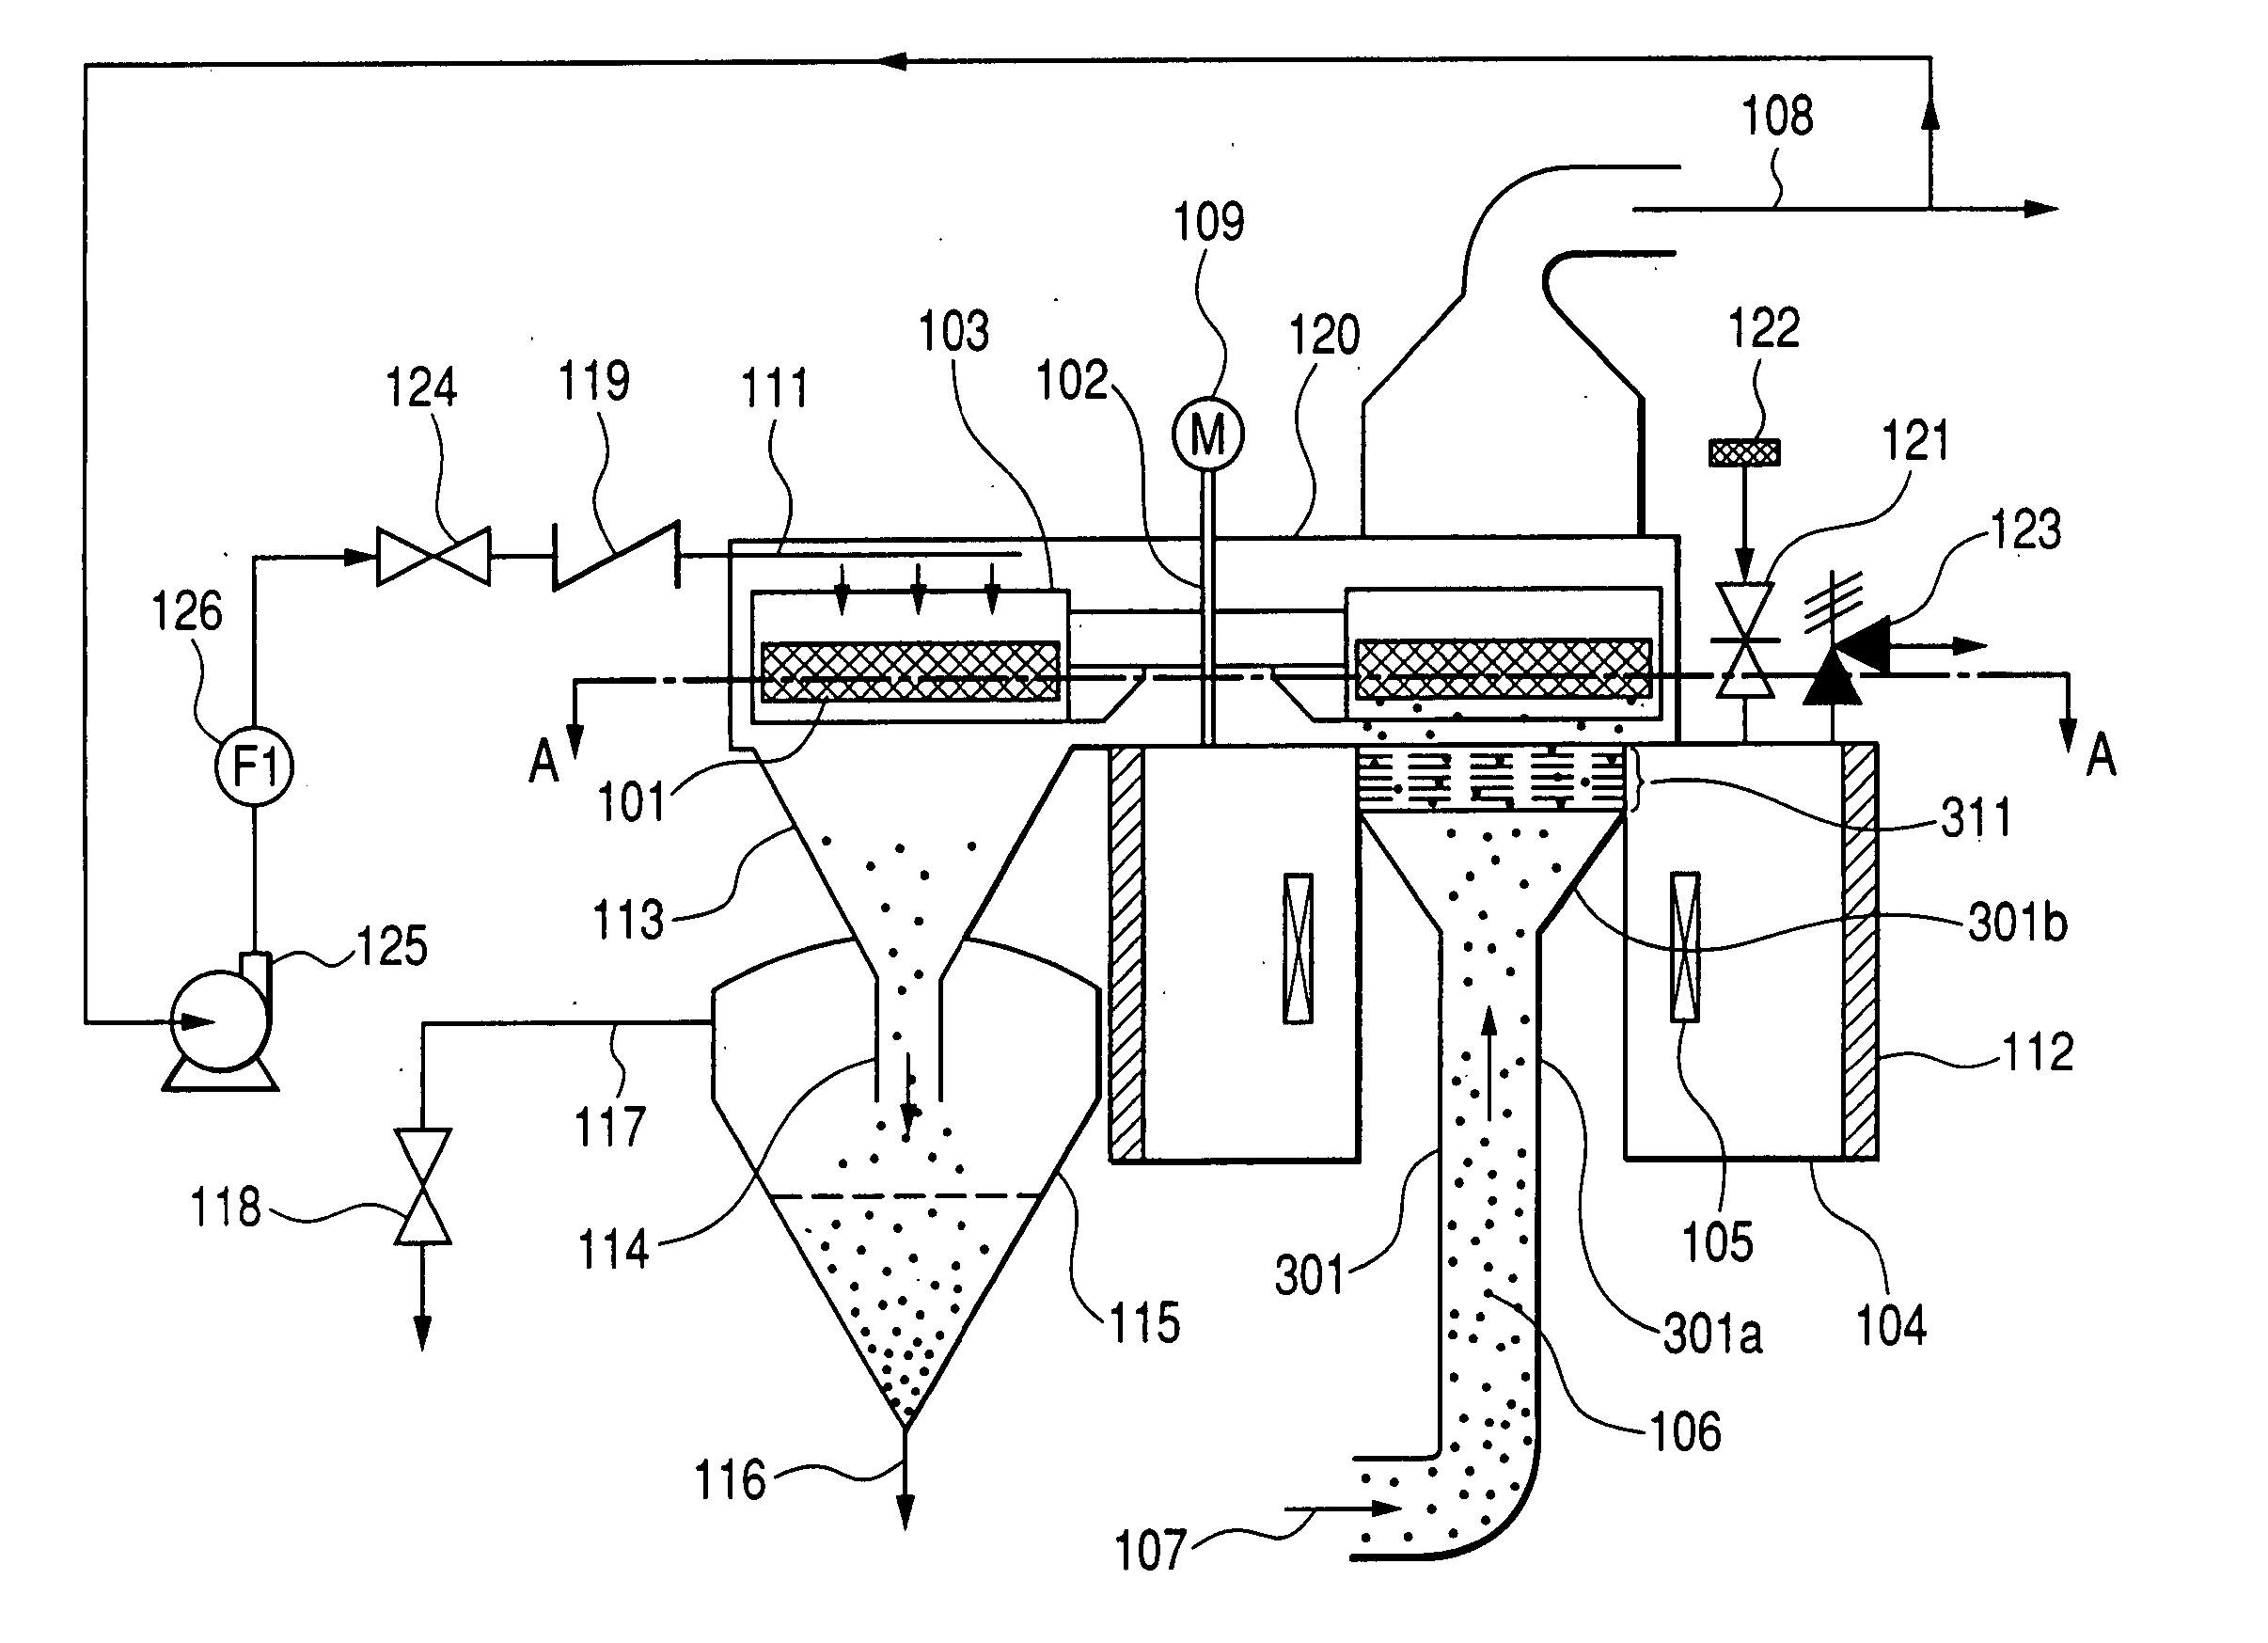 Magnetic separation unit and water purification system